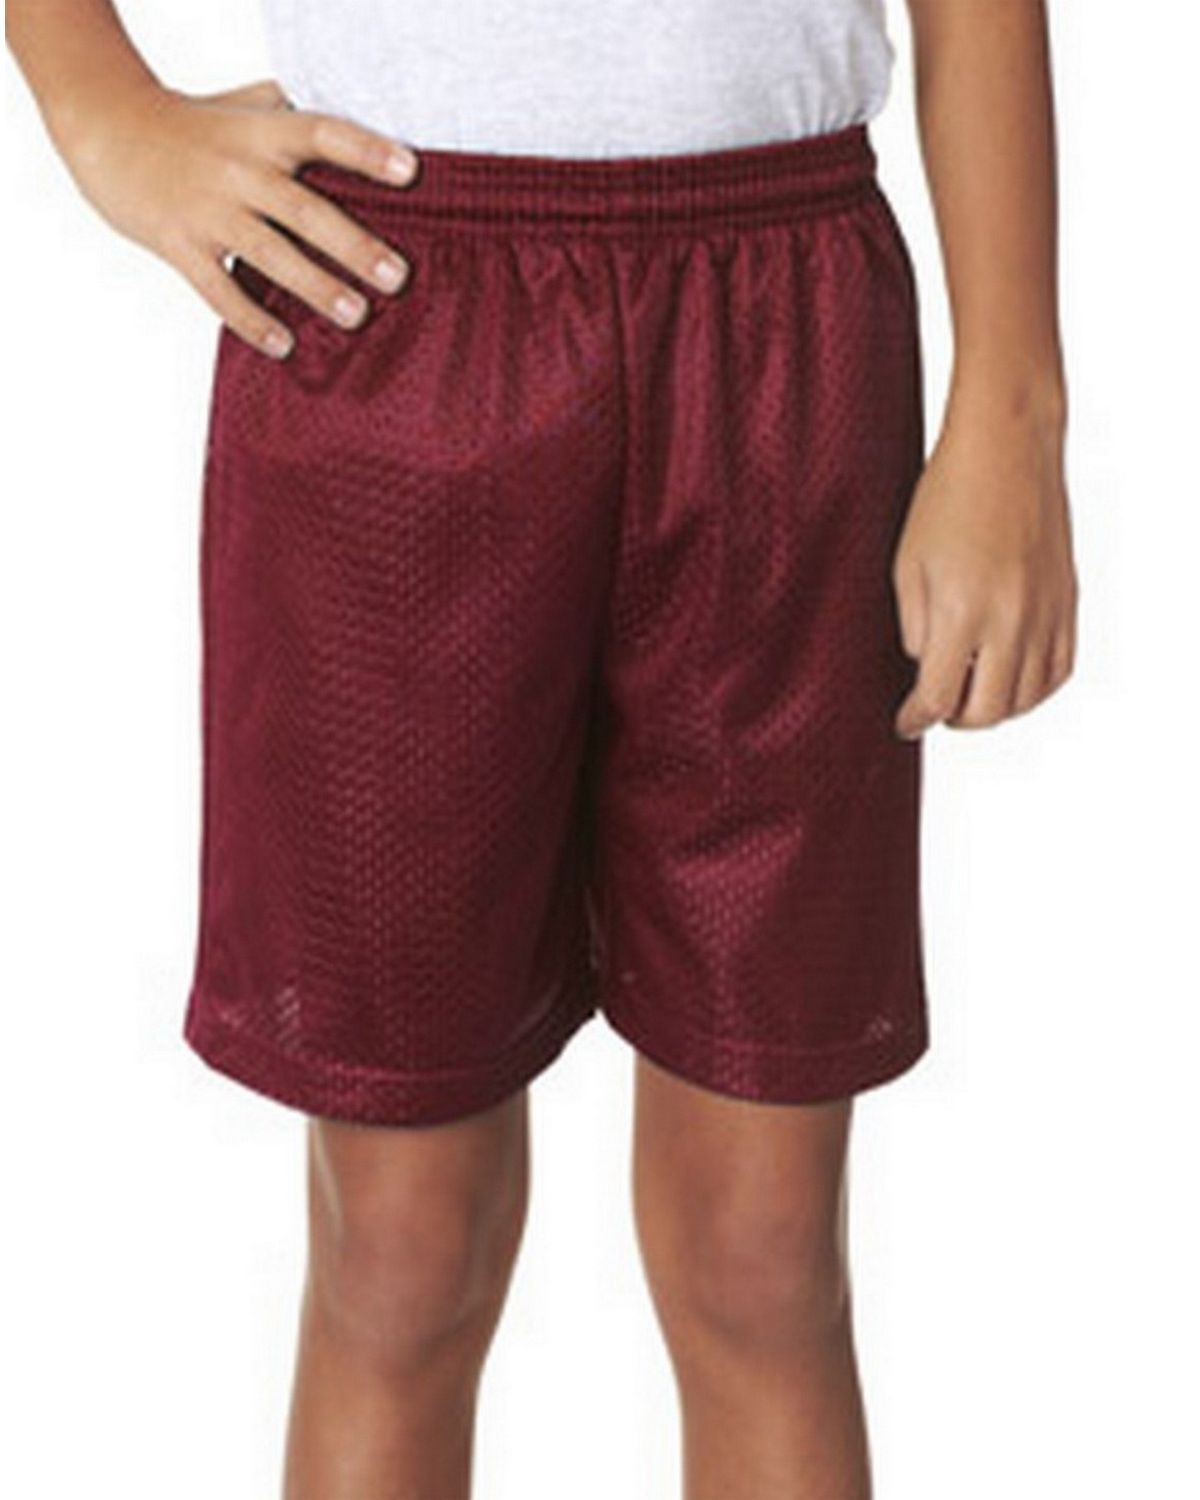 Buy A4 NB5301 Youth 6-Inch Lined Tricot Mesh Shorts - Apparelnbags.com